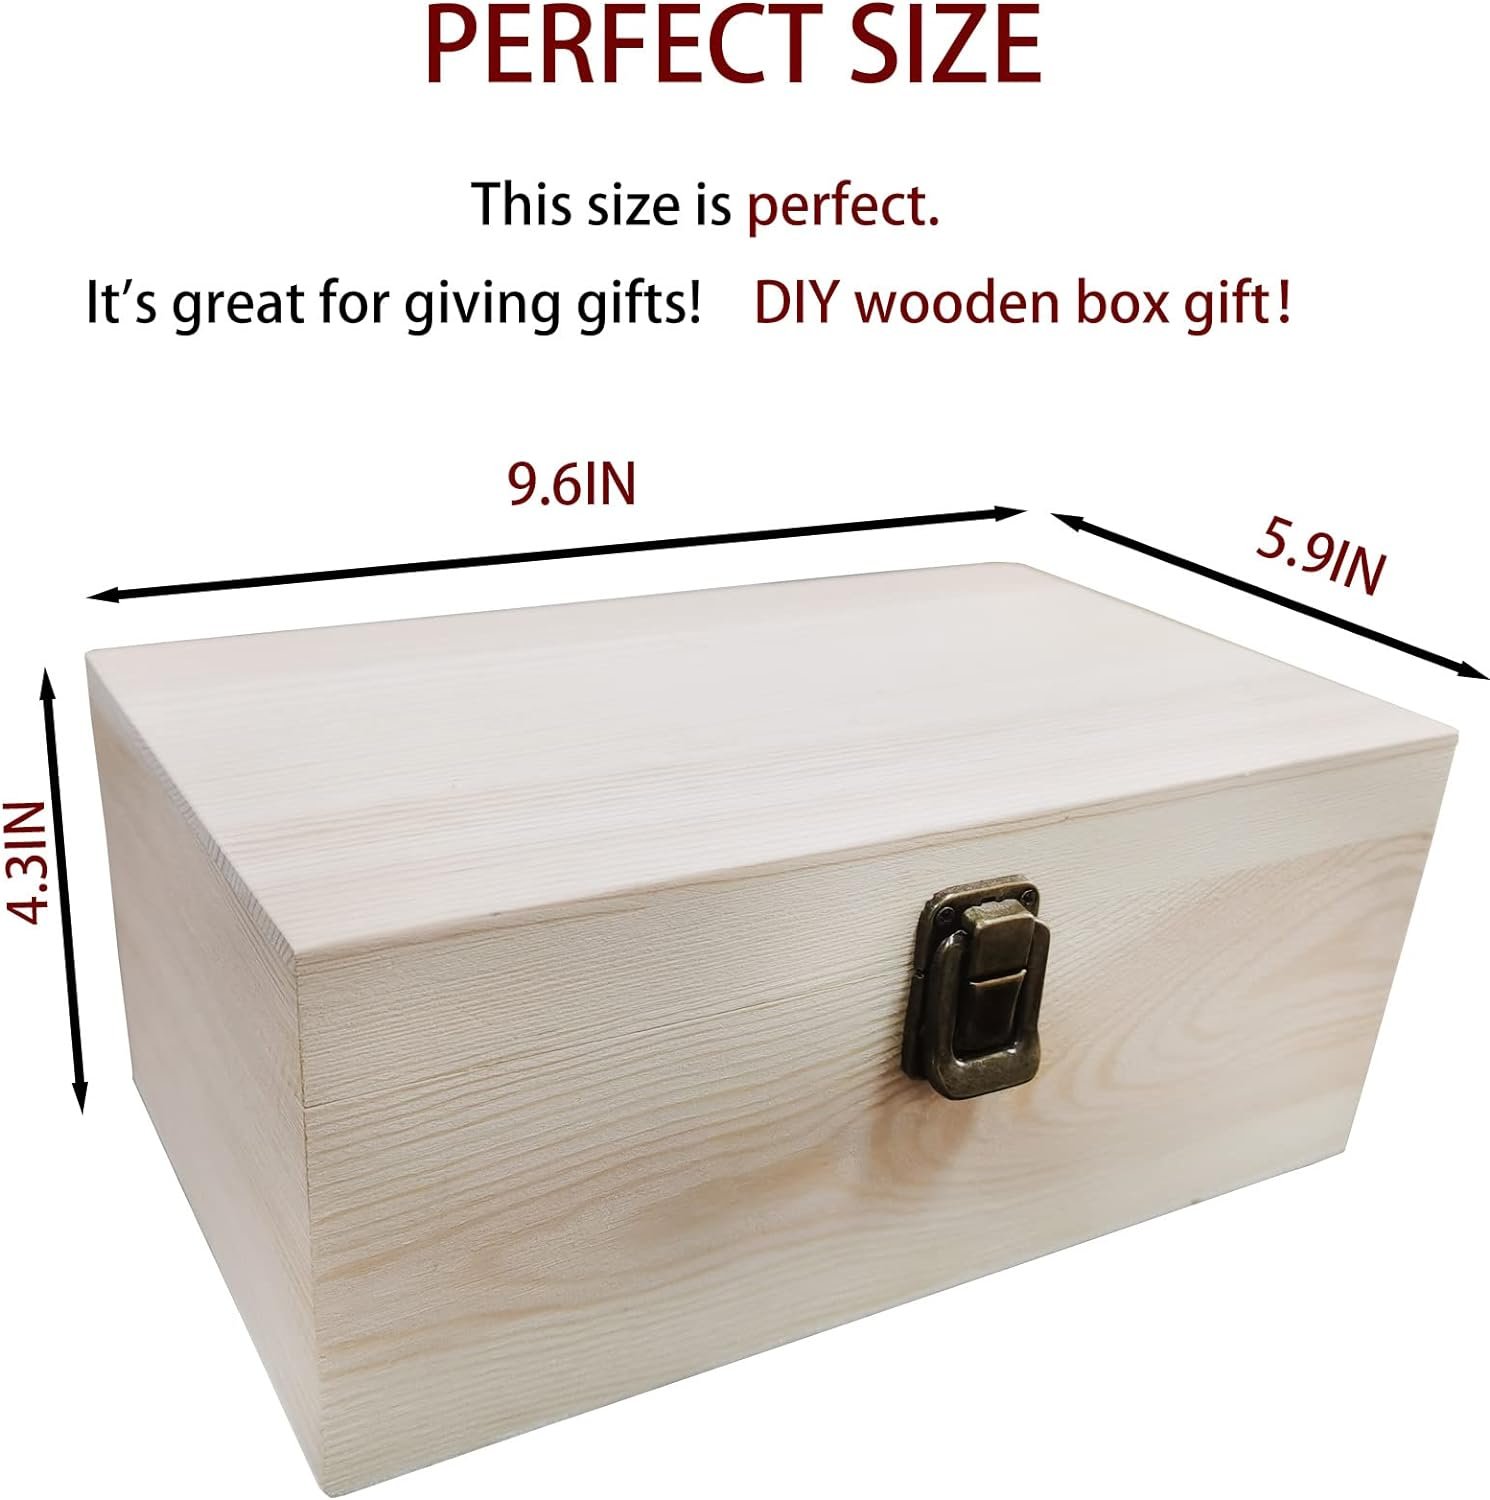 Wooden Craft Boxes Review